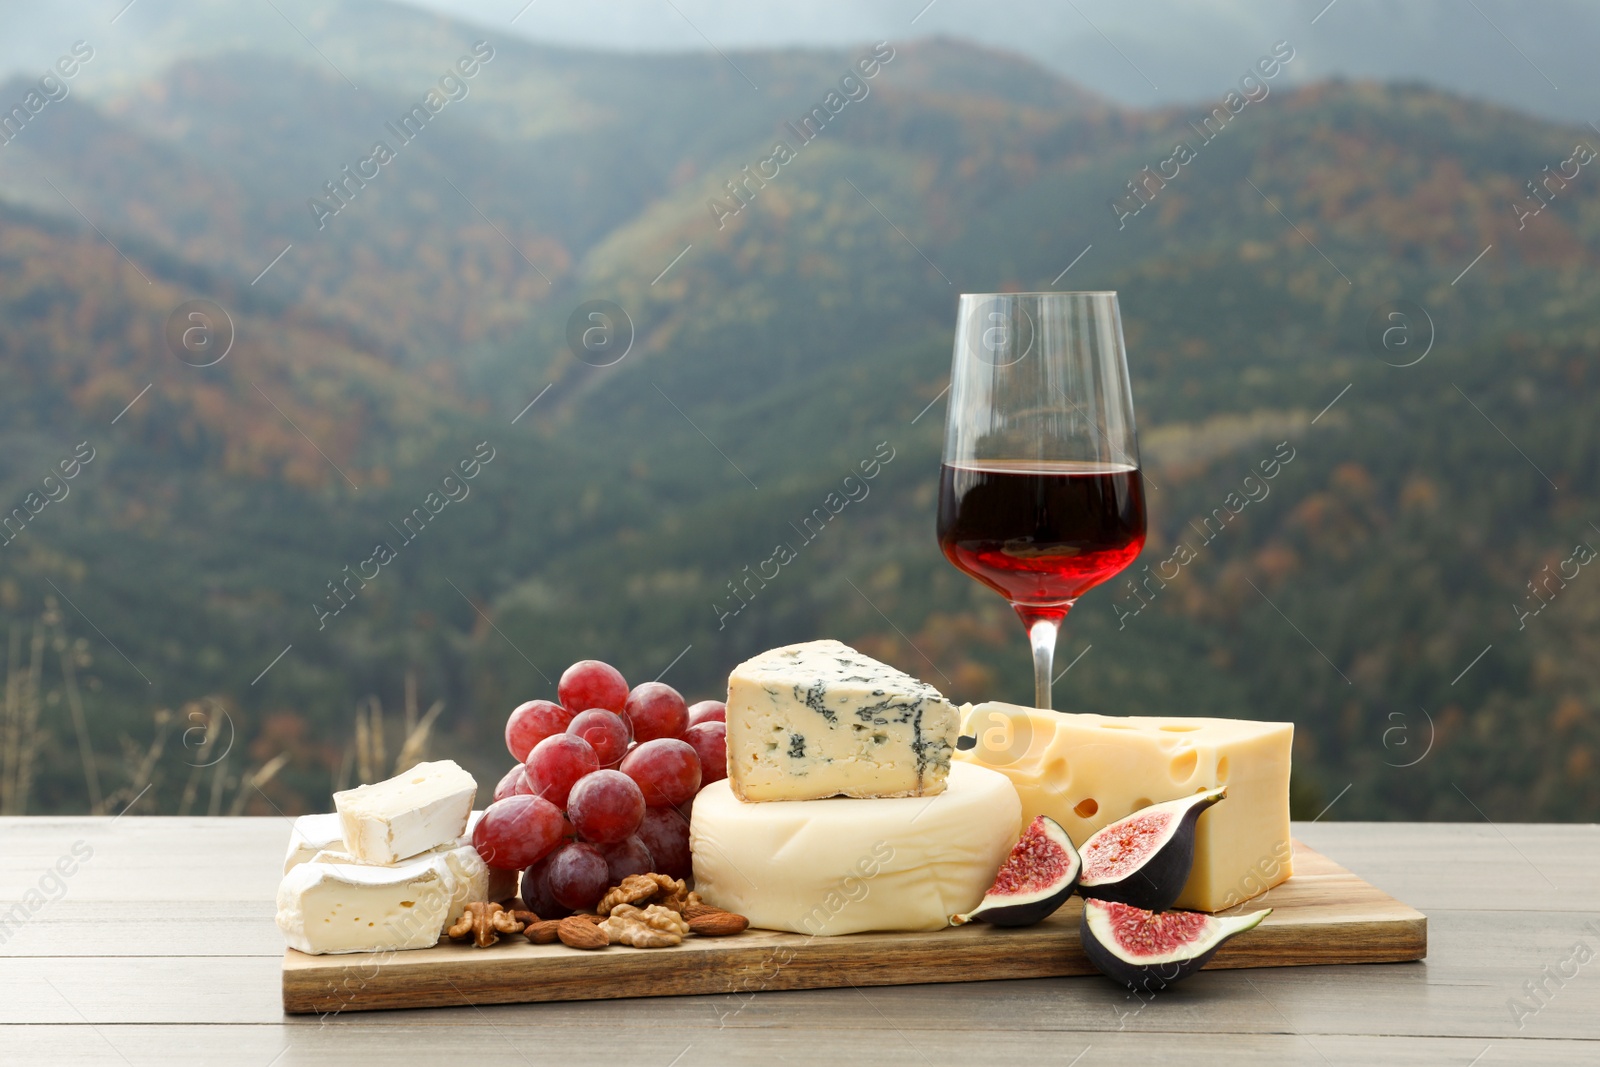 Photo of Different types of delicious cheeses, fruits and wine on wooden table against mountain landscape